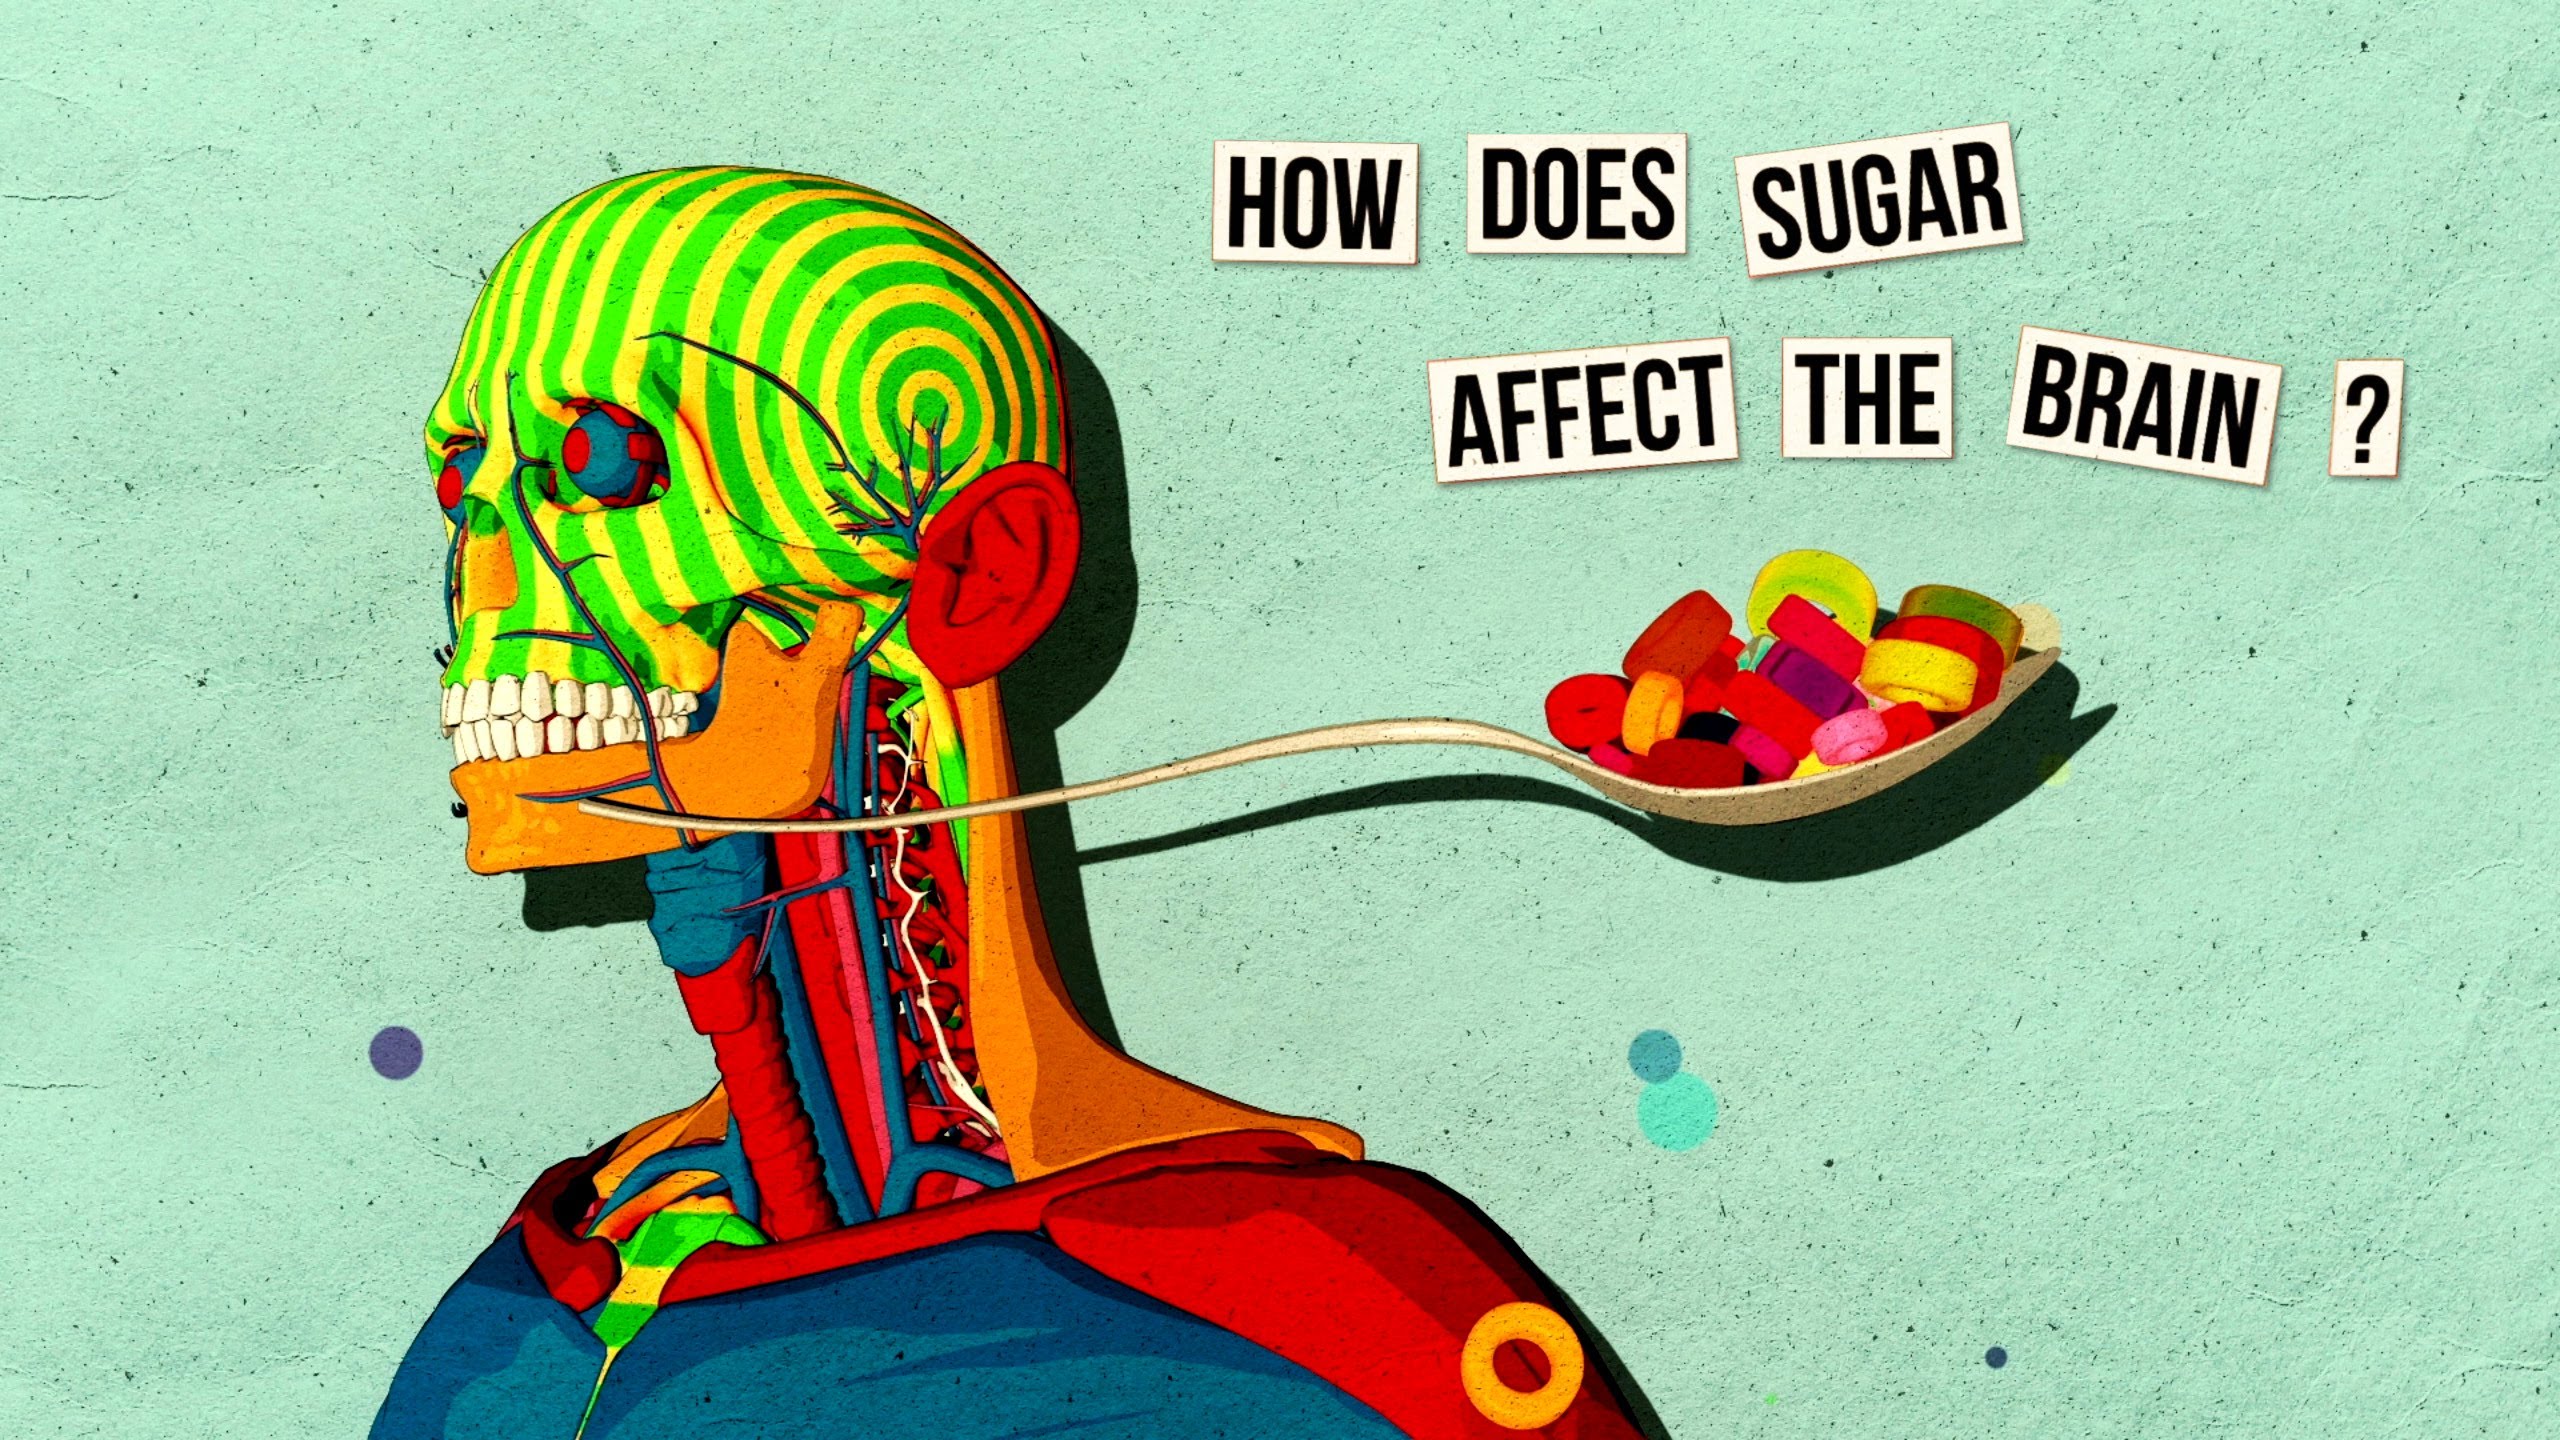 WATCH: How Sugar Affects The Brain | The Science Explorer